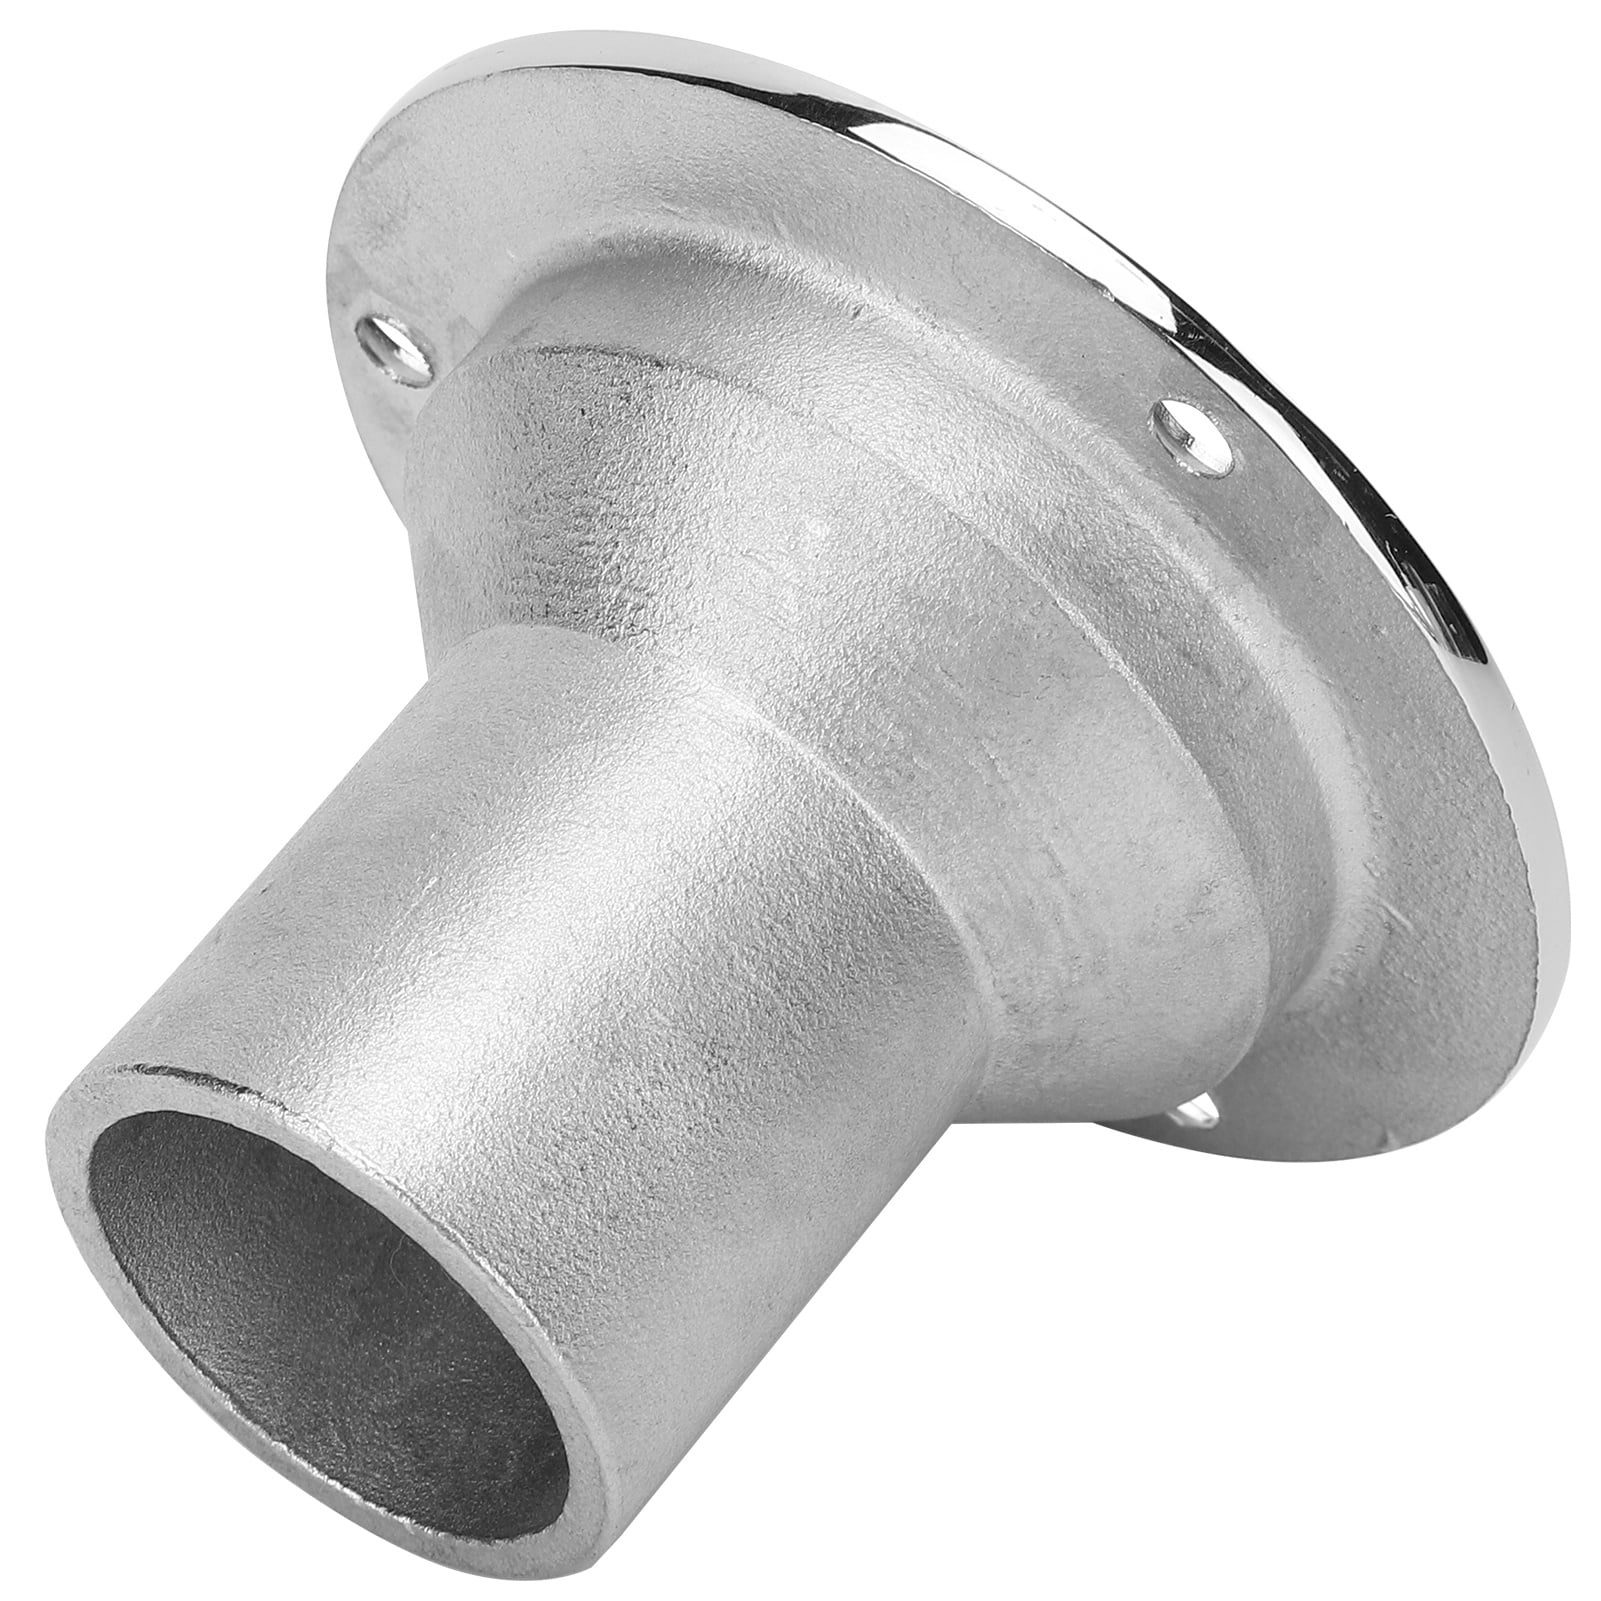 Details about   MJS025 Marine Boat Yacht Floor Deck Drain Scupper 316Stainless Steel Water Drain 